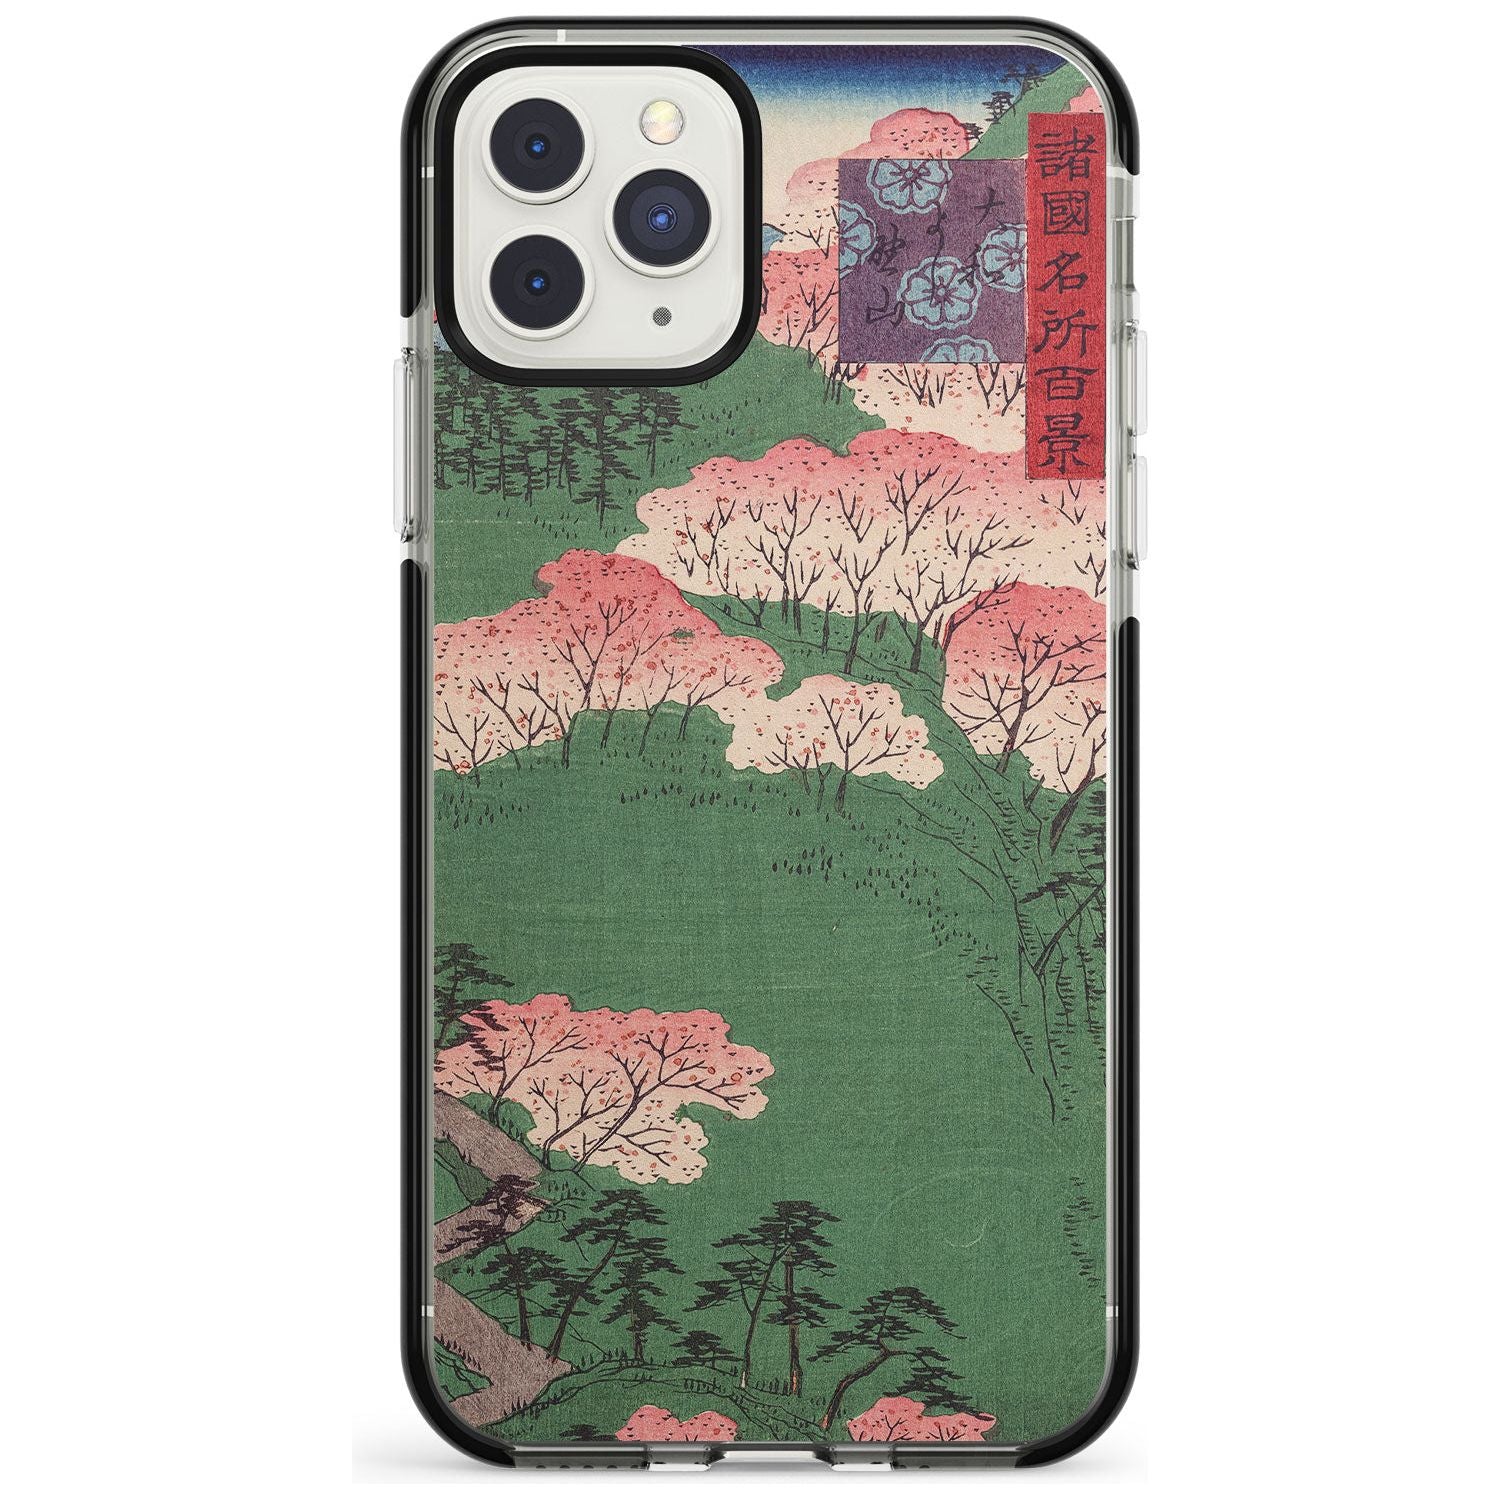 Japanese Illustration Cherry Blossom Forest Phone Case iPhone 11 Pro Max / Black Impact Case,iPhone 11 Pro / Black Impact Case,iPhone 12 Pro Max / Black Impact Case Blanc Space